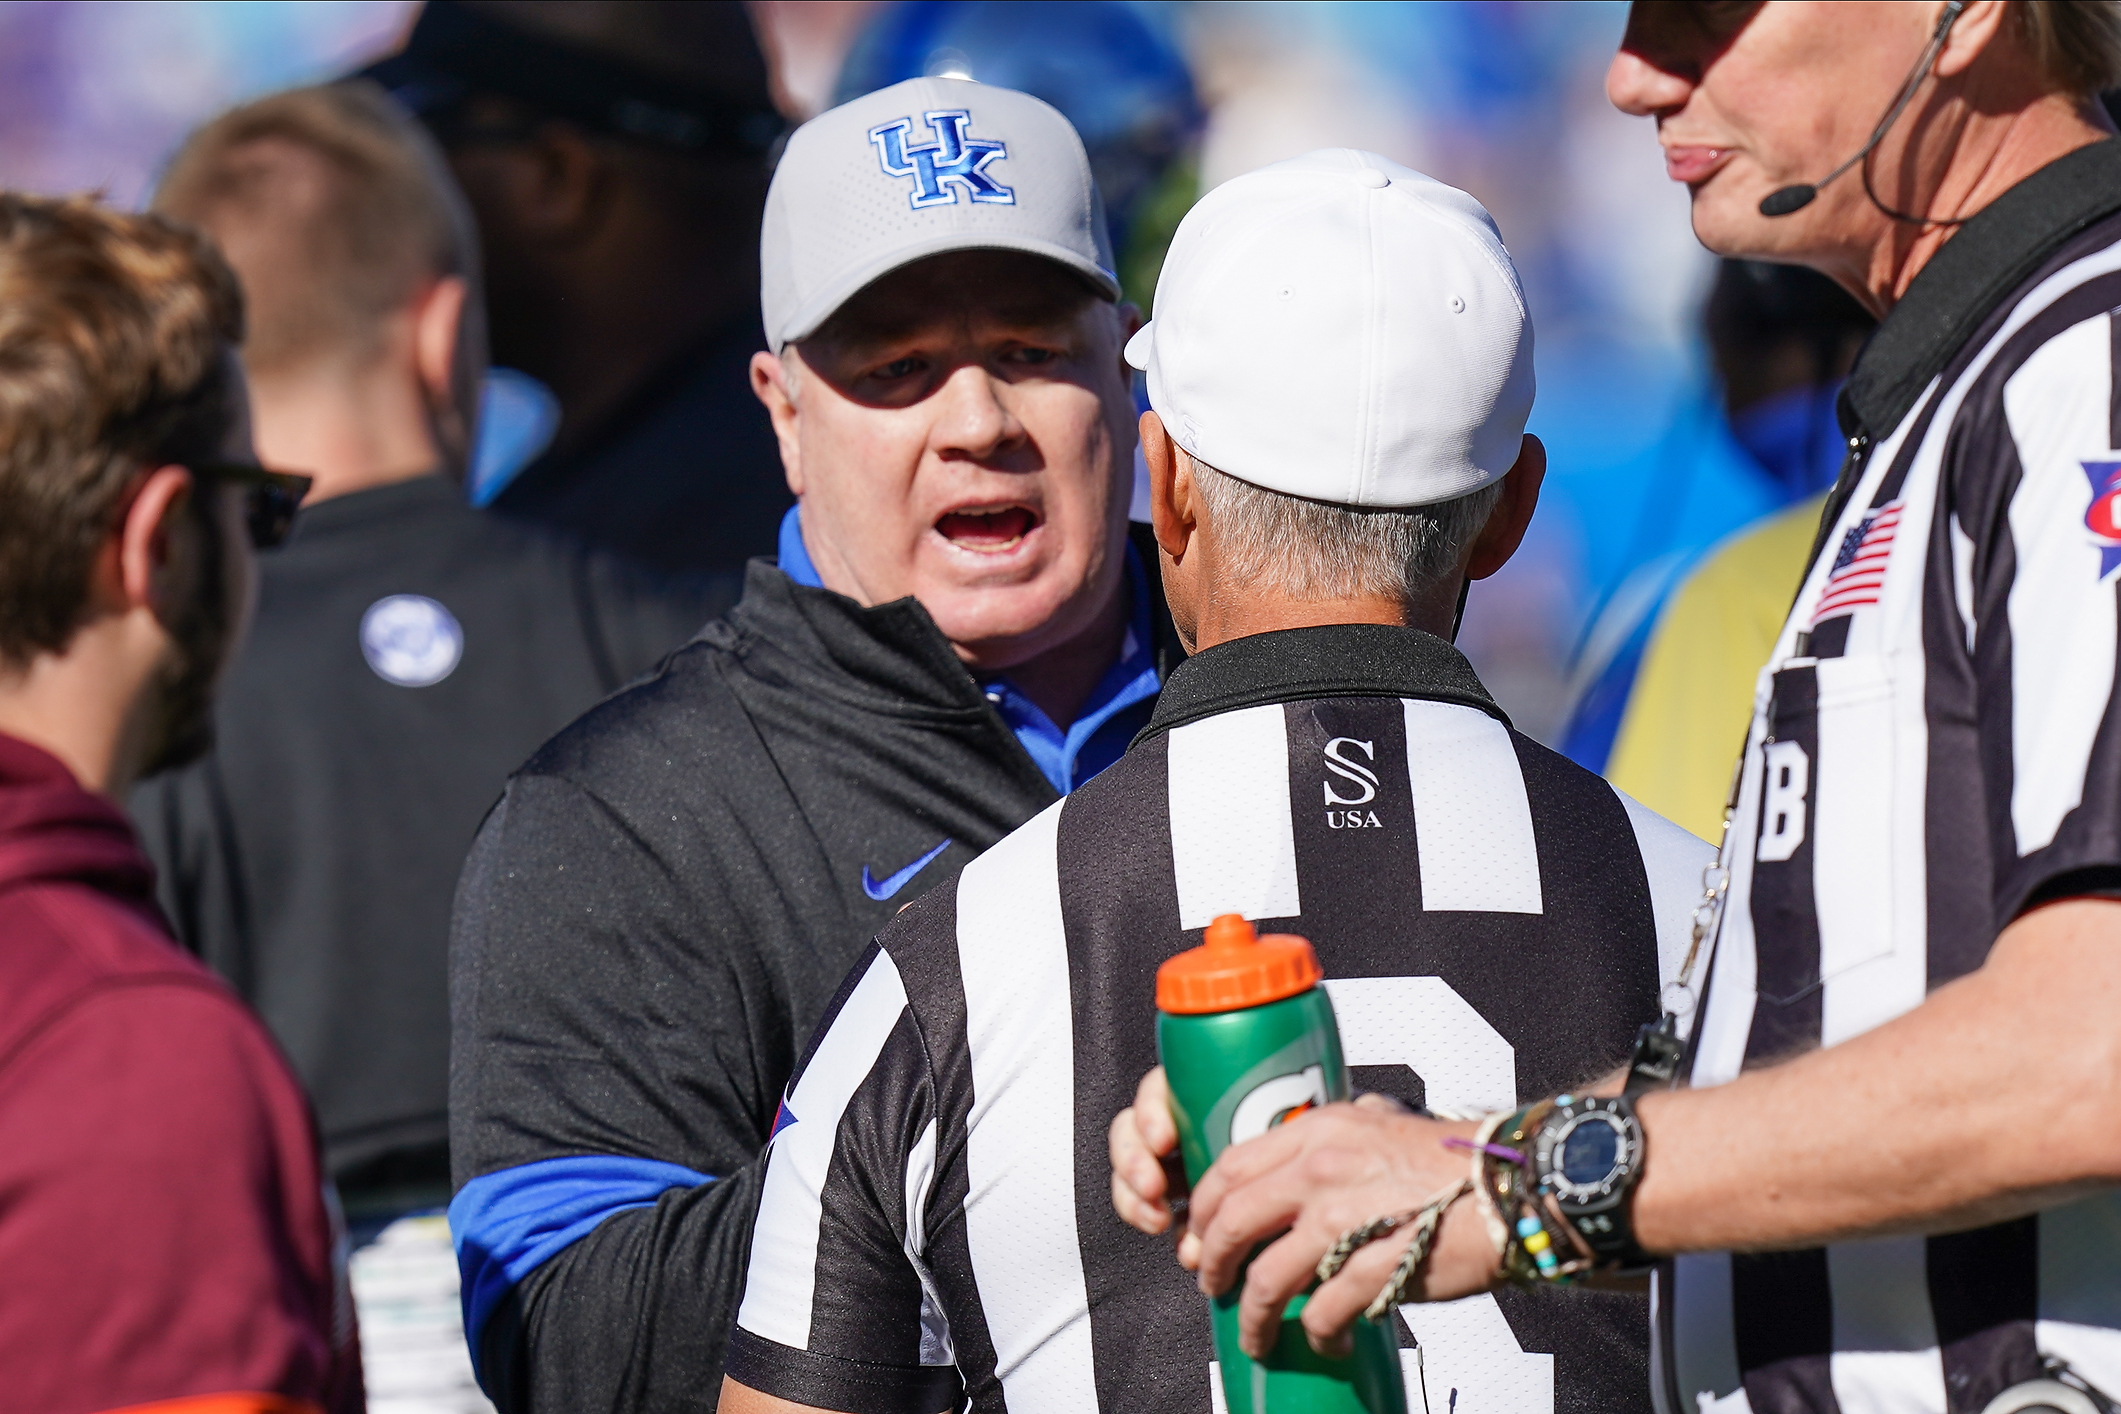 Dec 31, 2019; Charlotte, North Carolina, USA; Kentucky Wildcats head coach Mark Stoops argues a call with the official during the second quarter against the Virginia Tech Hokies of the Belk Bowl at Bank of America Stadium. Mandatory Credit: Jim Dedmon-USA TODAY Sports